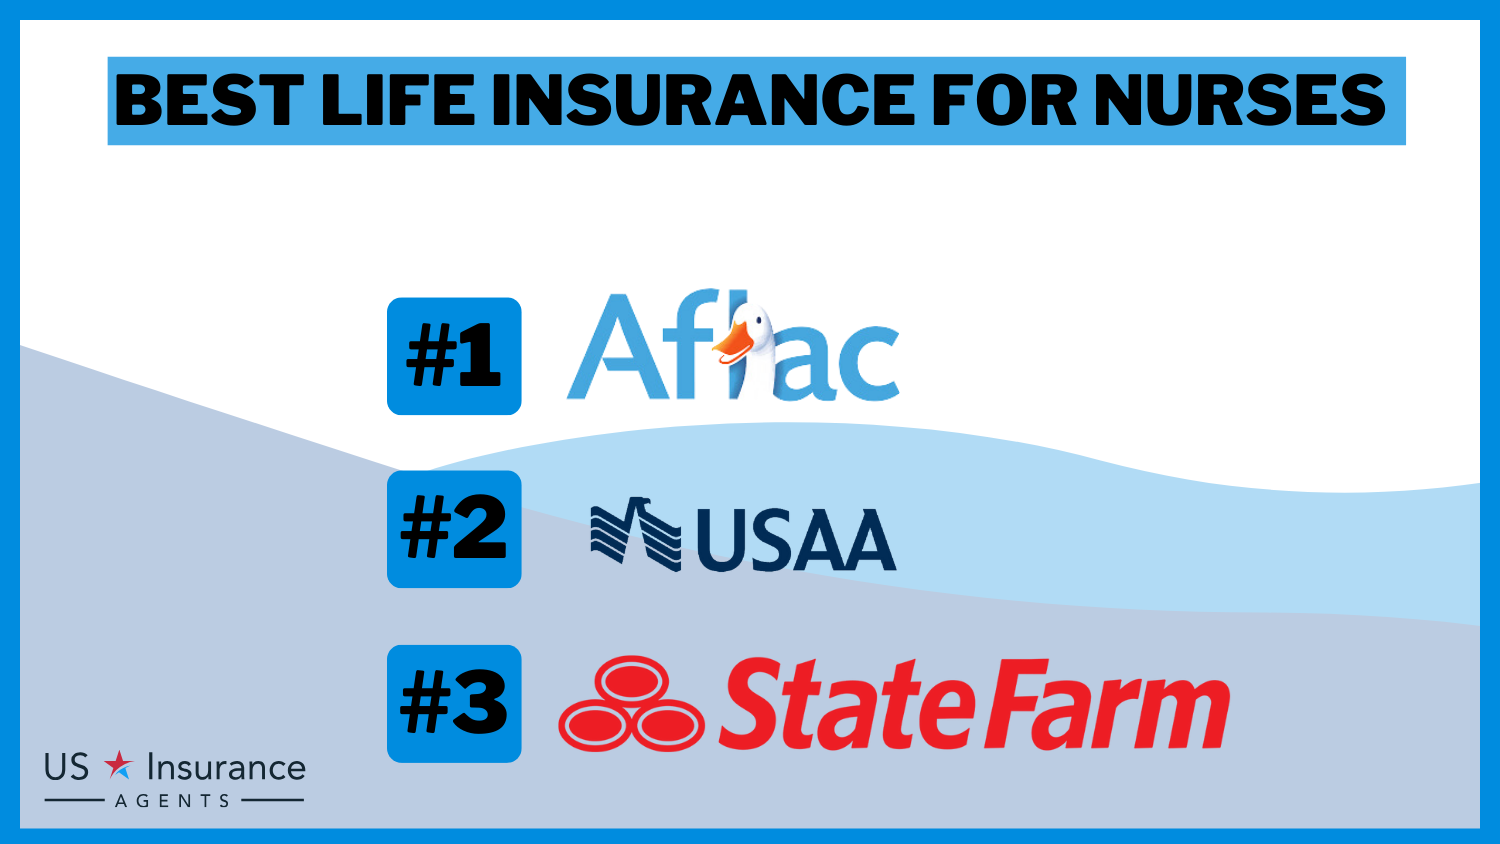 3 Best Life Insurance for Nurses-USIA: Aflac, USAA, and State Farm.